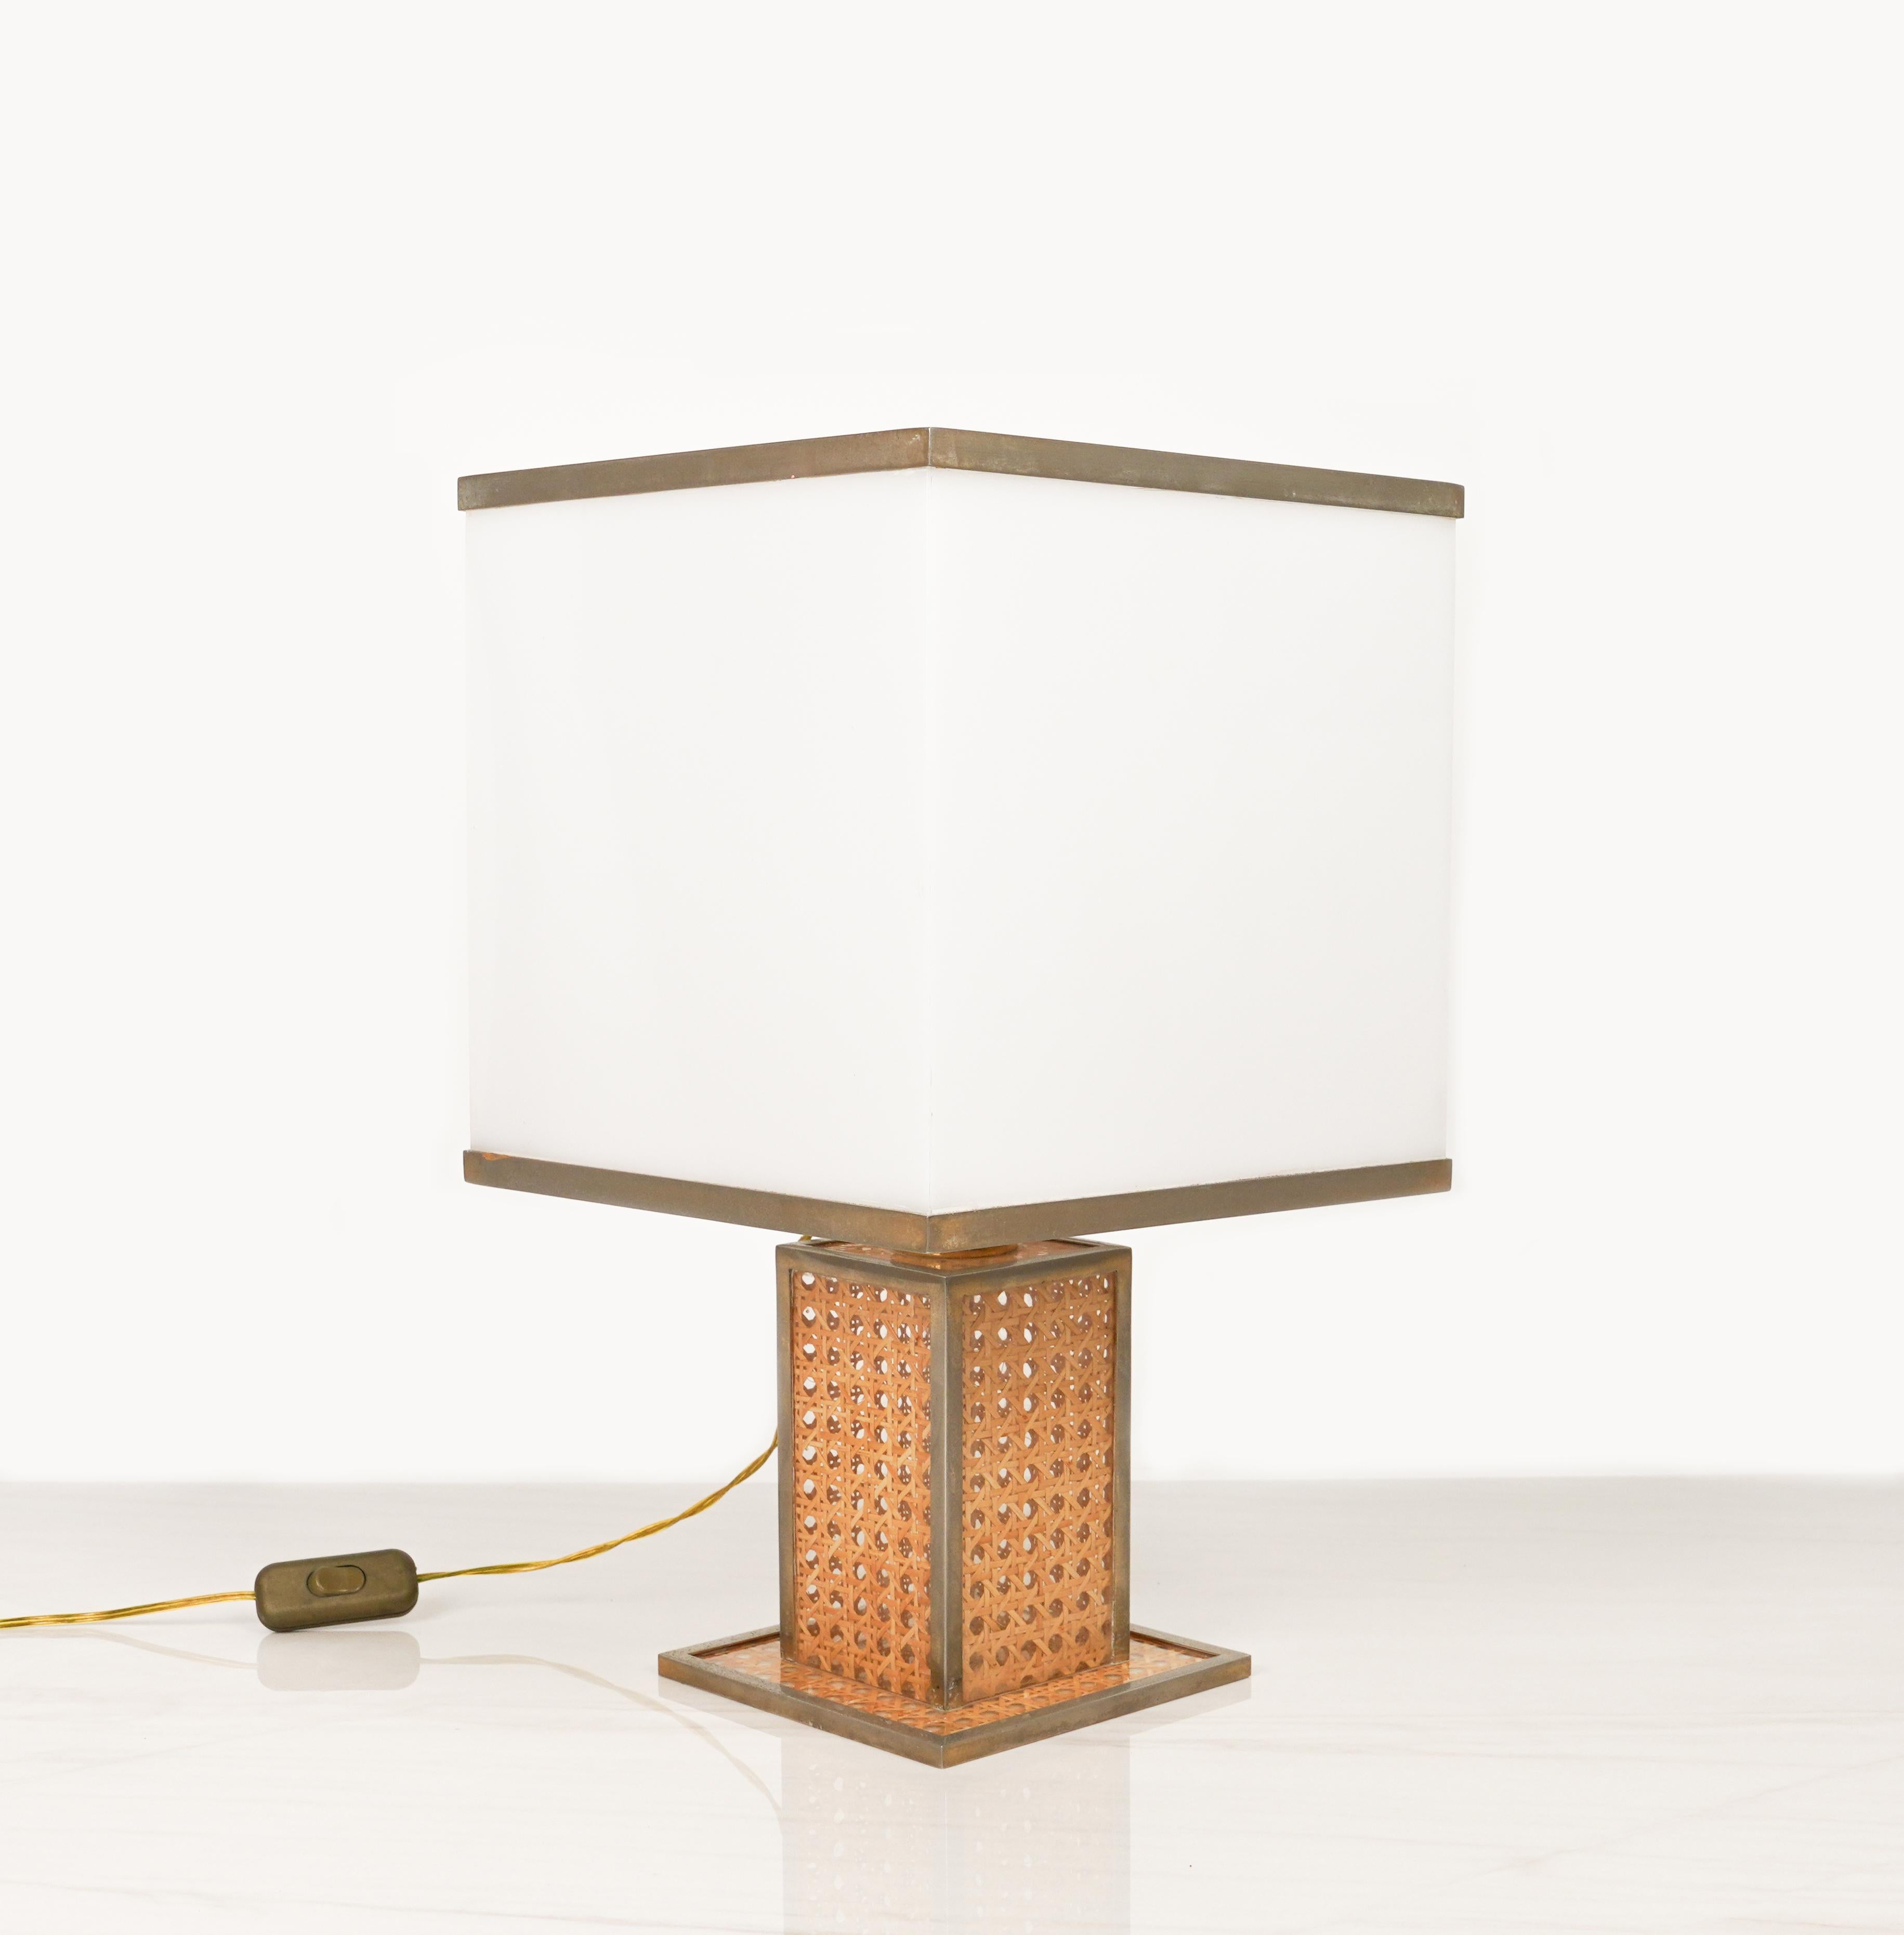 Italian Table Lamp in Lucite, Rattan and Brass Christian Dior Style, Italy 1970s For Sale